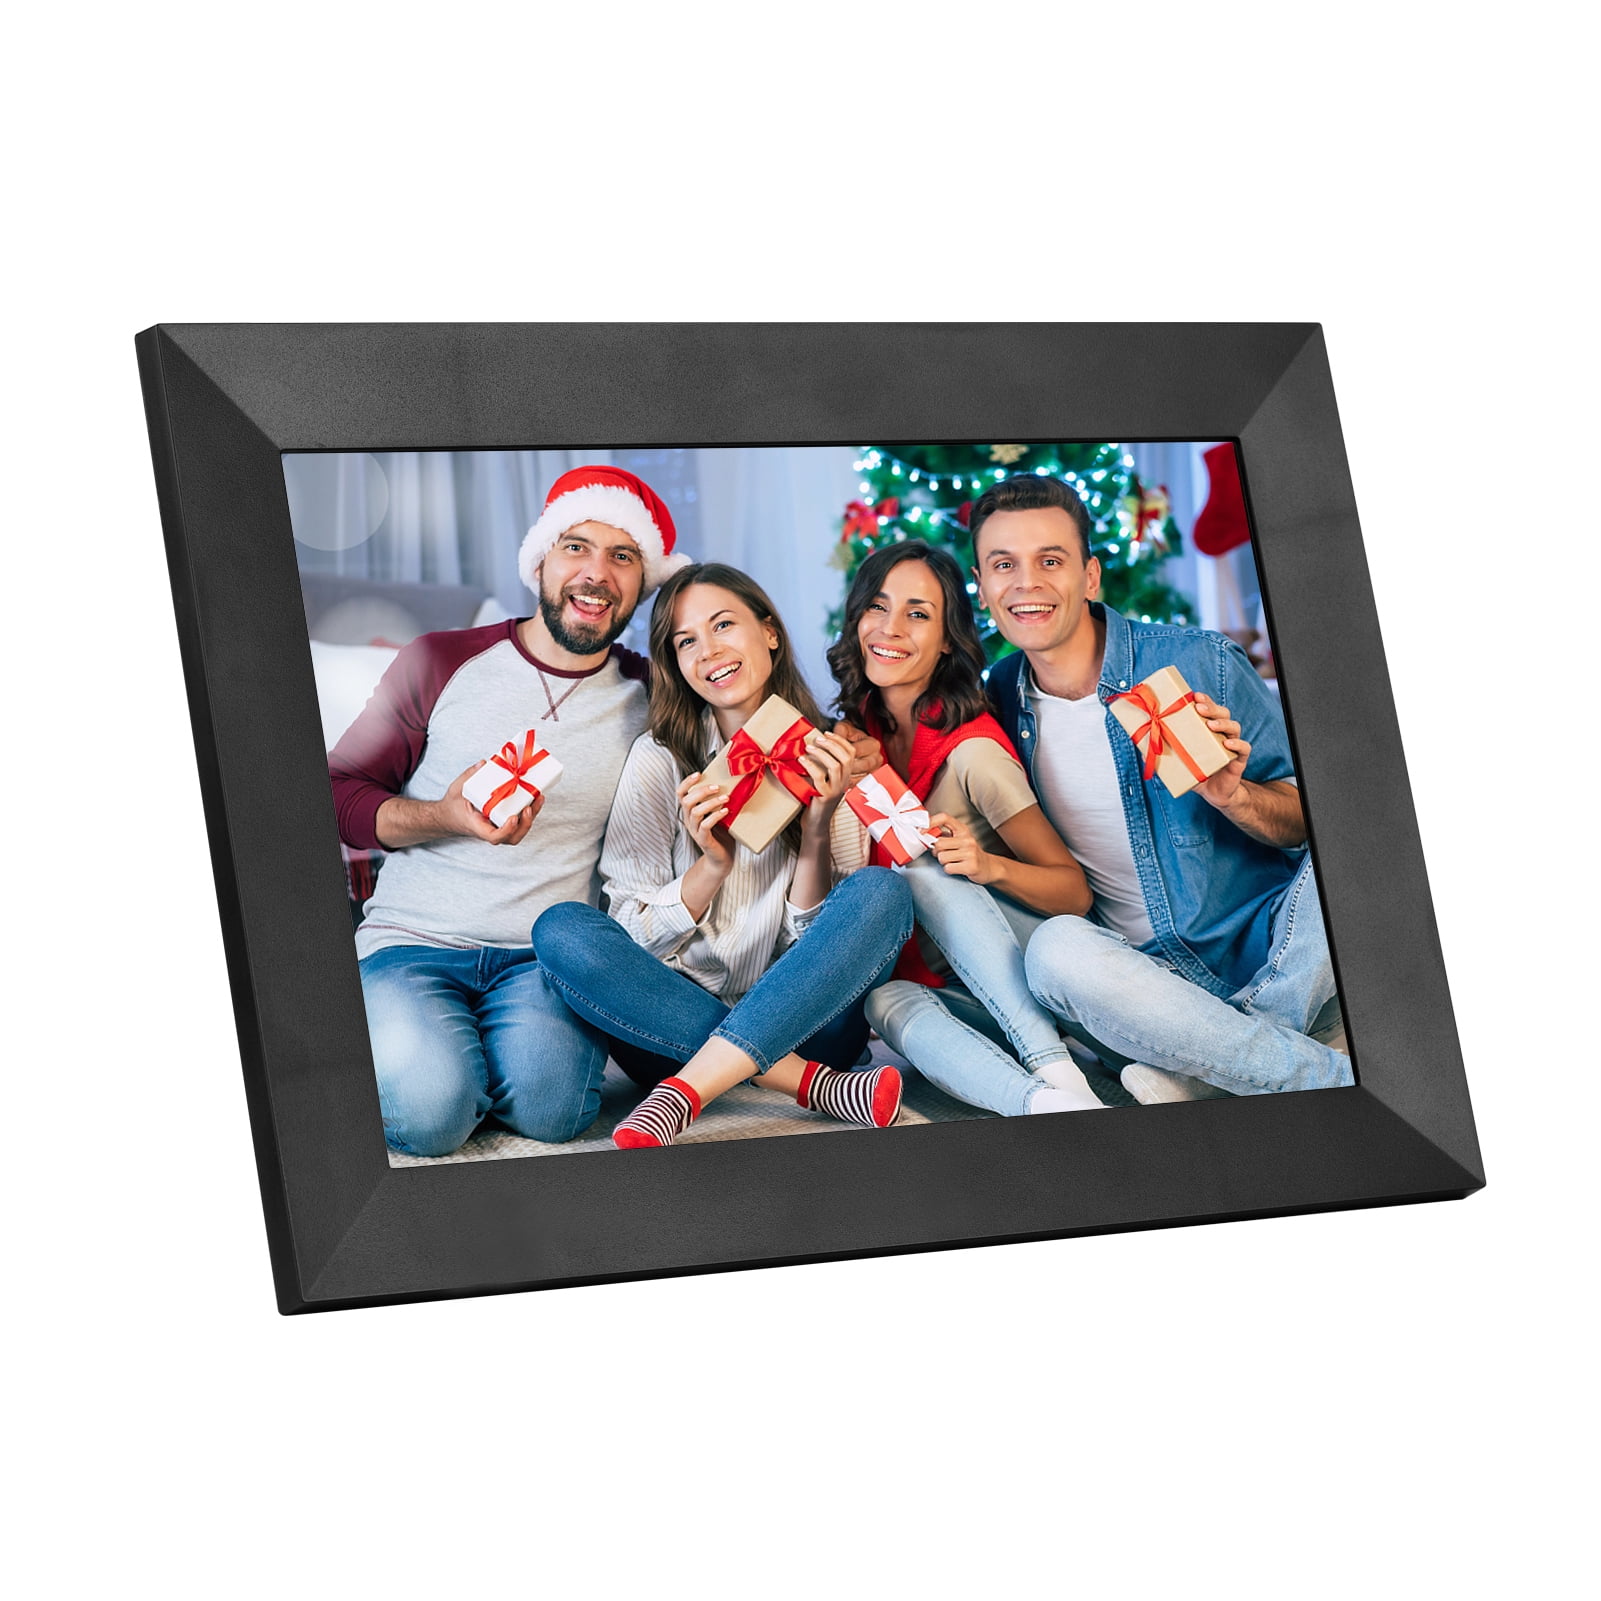 Resolution 1280x800-16:9 Display;Matte White ; Gift for Parents not Included 10 inch IPS 1080p USB Digital Photo/Picture Frame with Auto Slideshow Using USB Flash Drive & SD Card 